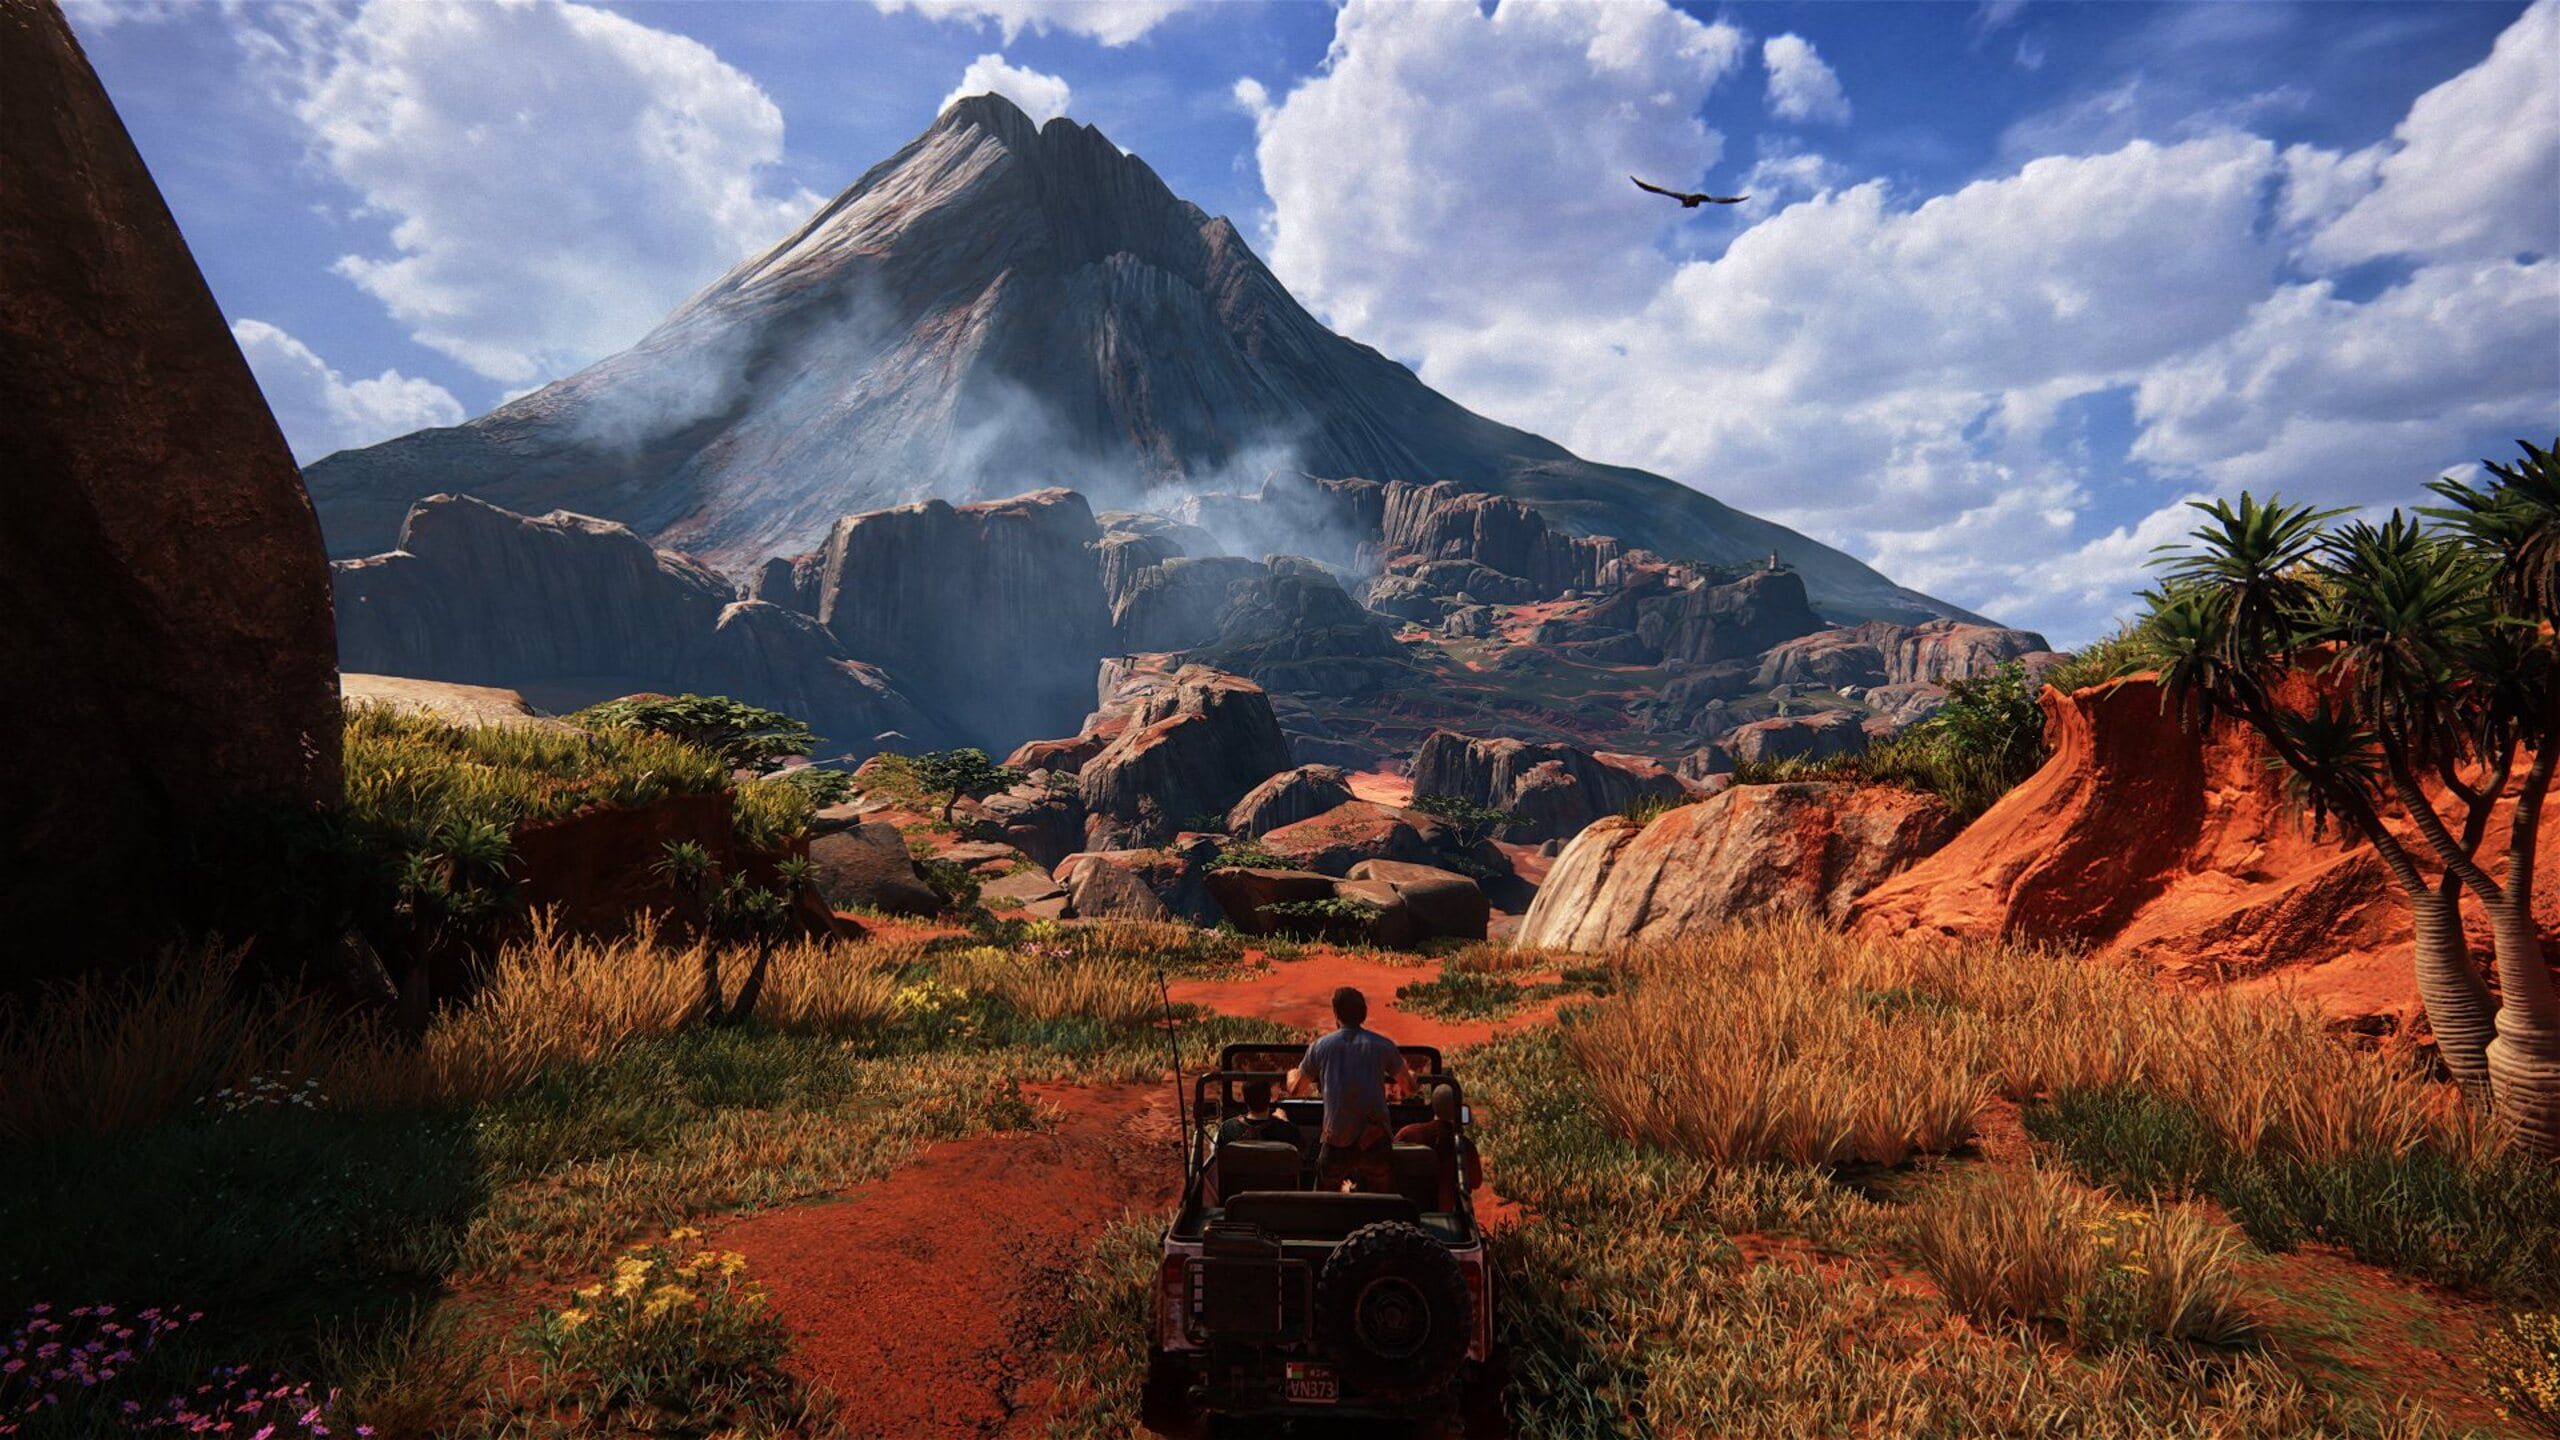 Screenshot do game Uncharted 4: A Thief's End